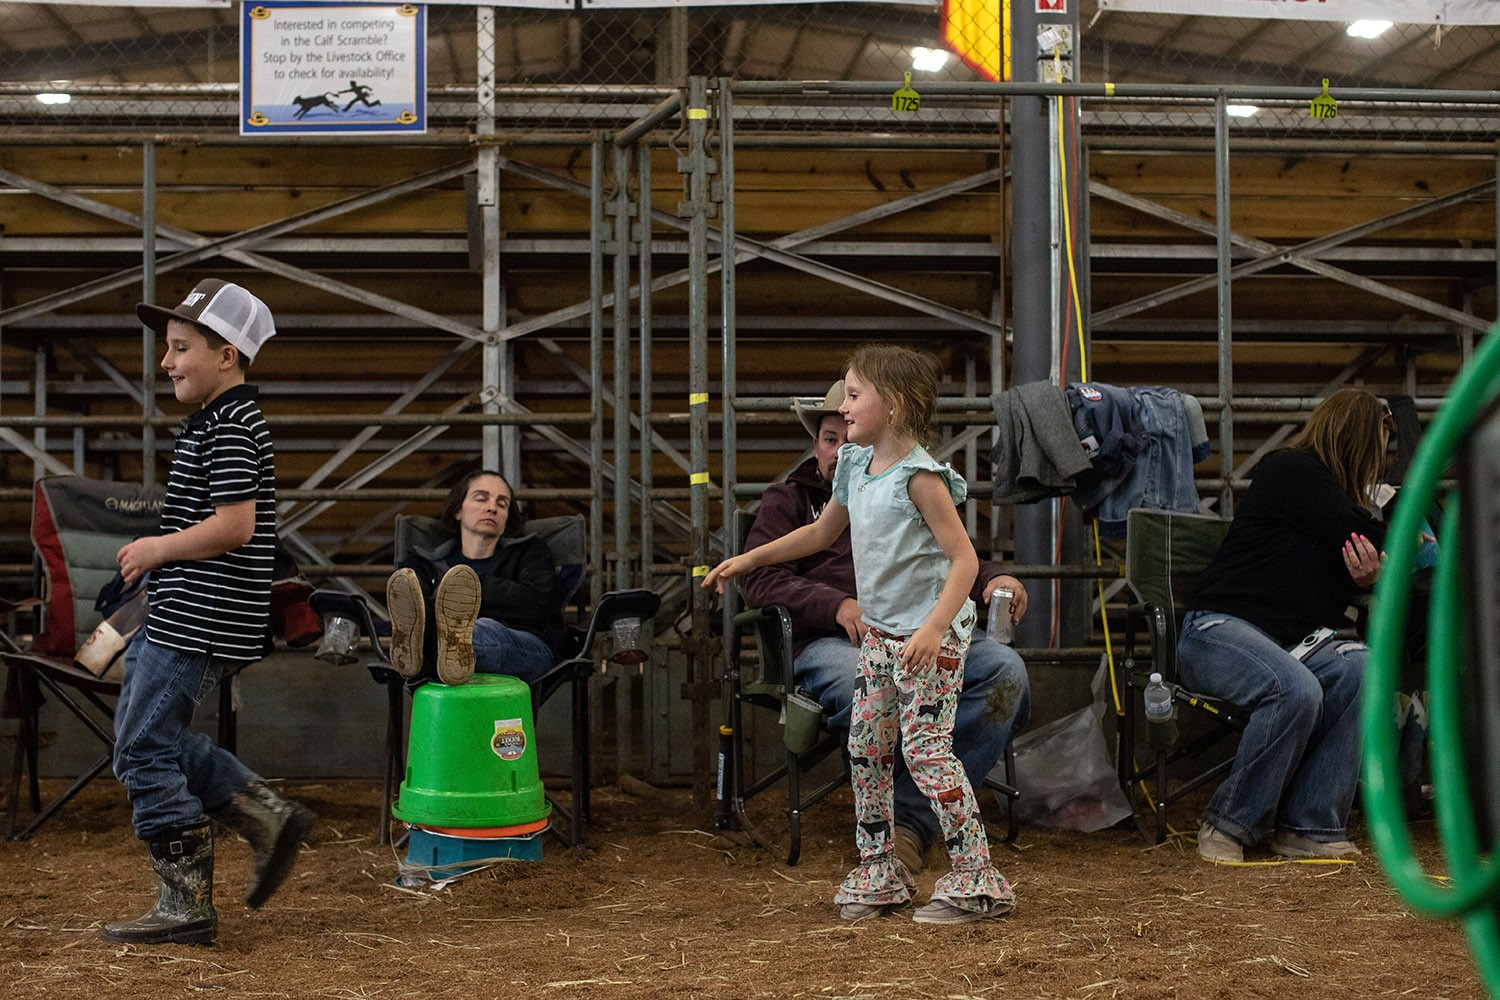 Children play while adults rest in the cattle barn at the San Antonio Stock Show and Rodeo on Friday, Feb. 18, 2022. Photo by Kaylee Greenlee Beal | Heron contributor